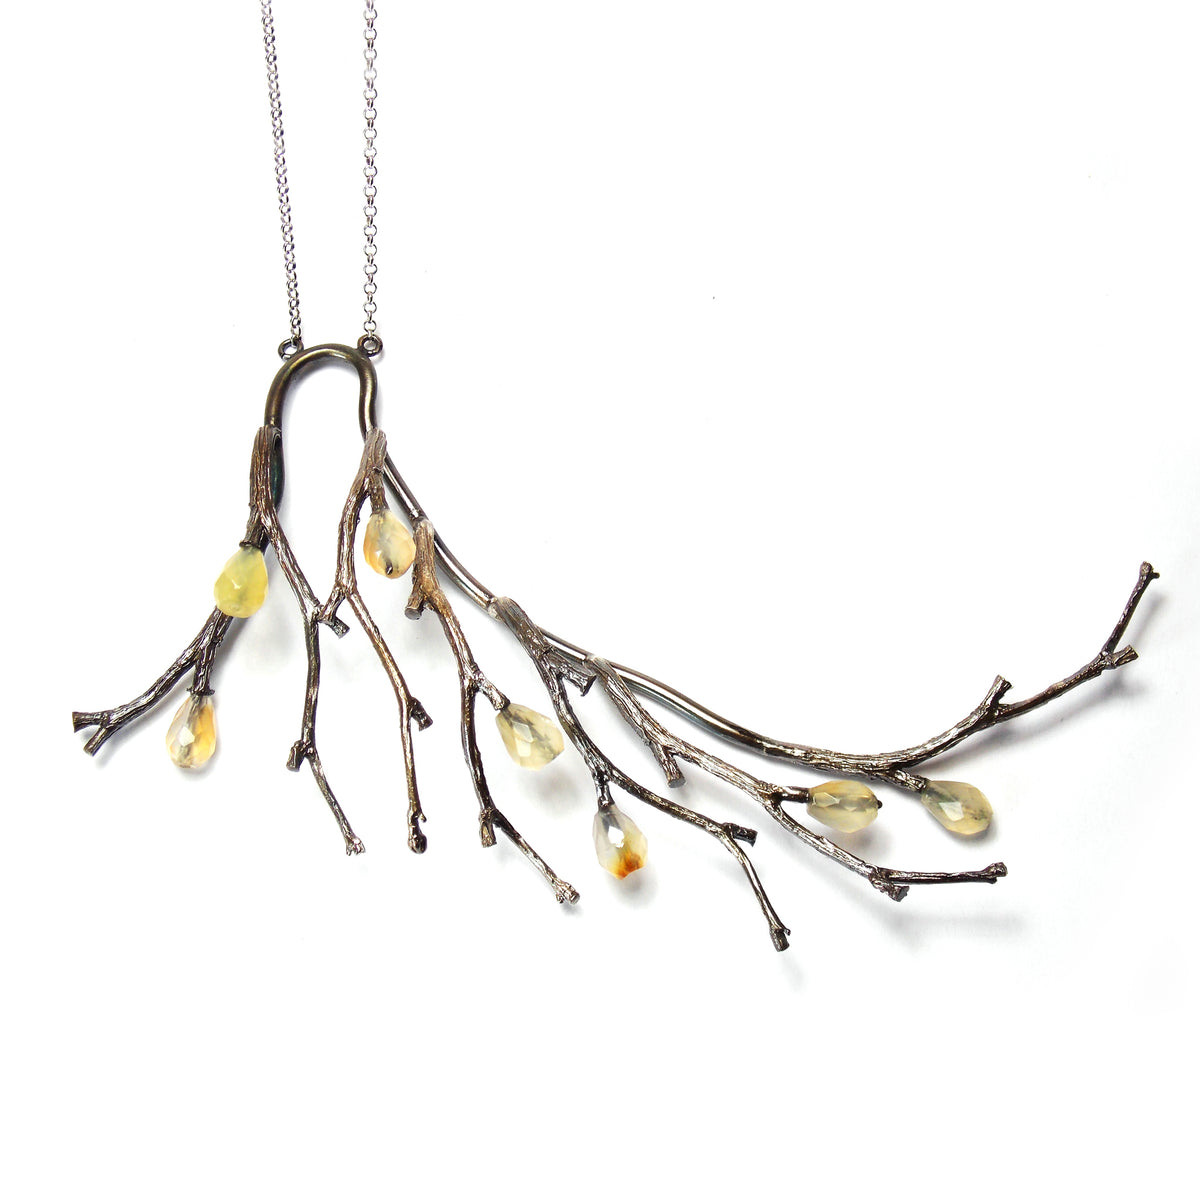 Enchanted forest - pendant